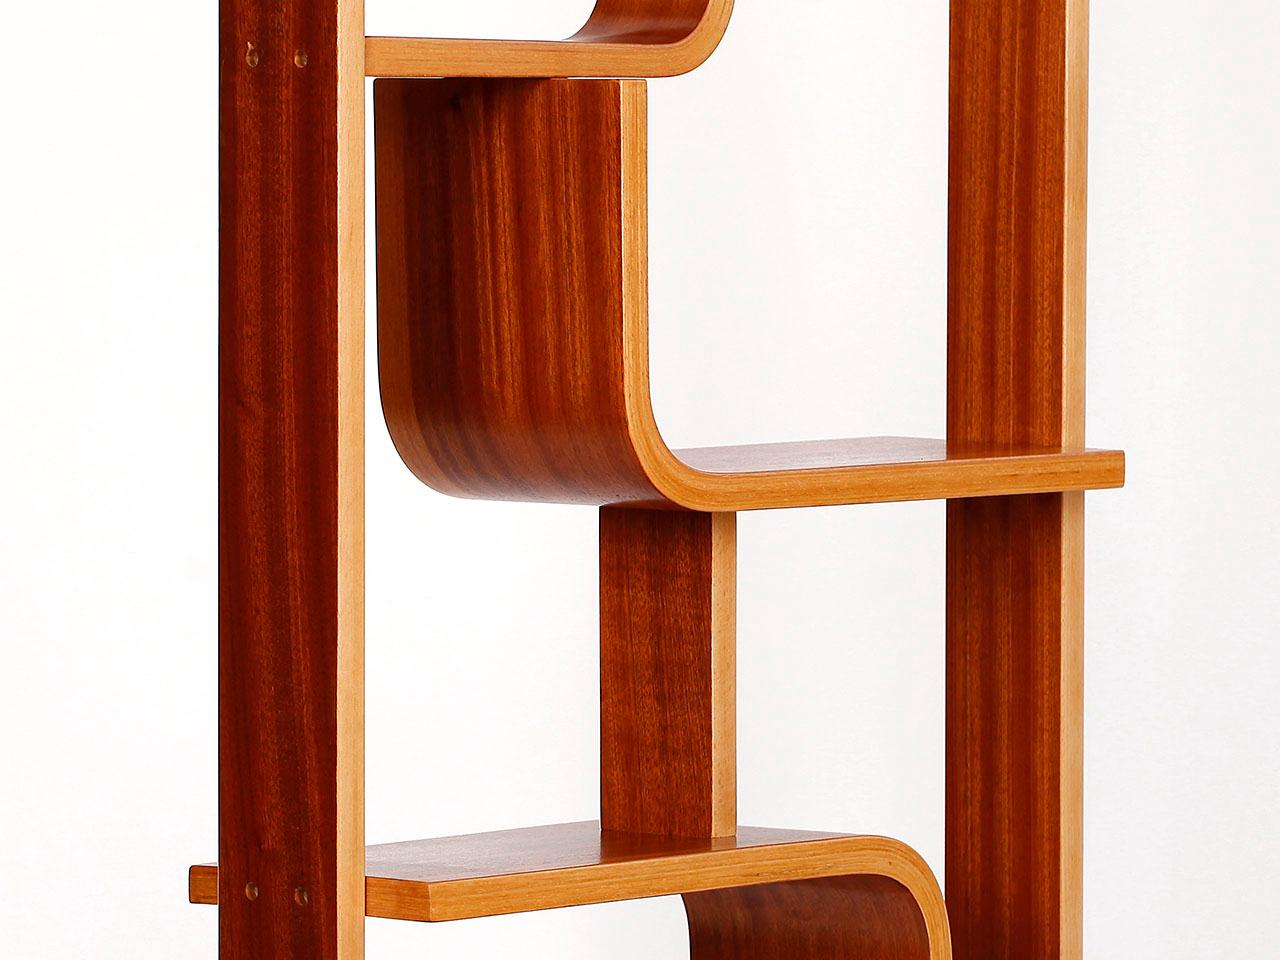 20th Century Mahogany Room Divider by Ludvik Volak for Holesov, 1960s, Restored, Set of Two